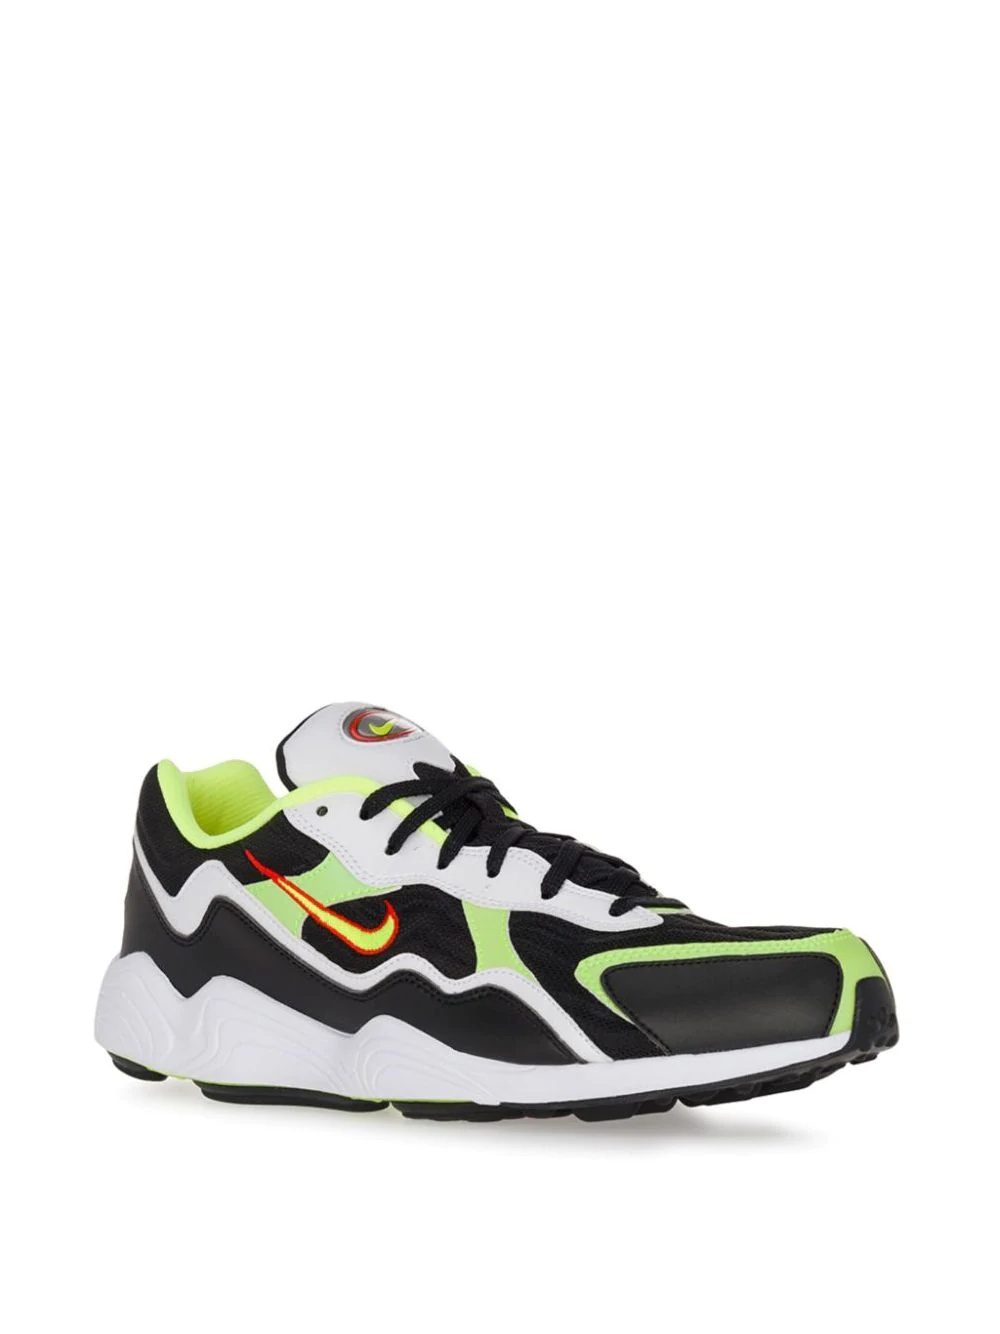 Air Zoom Alpha "Black/Volt/Habanero Red/White" sneakers - 2